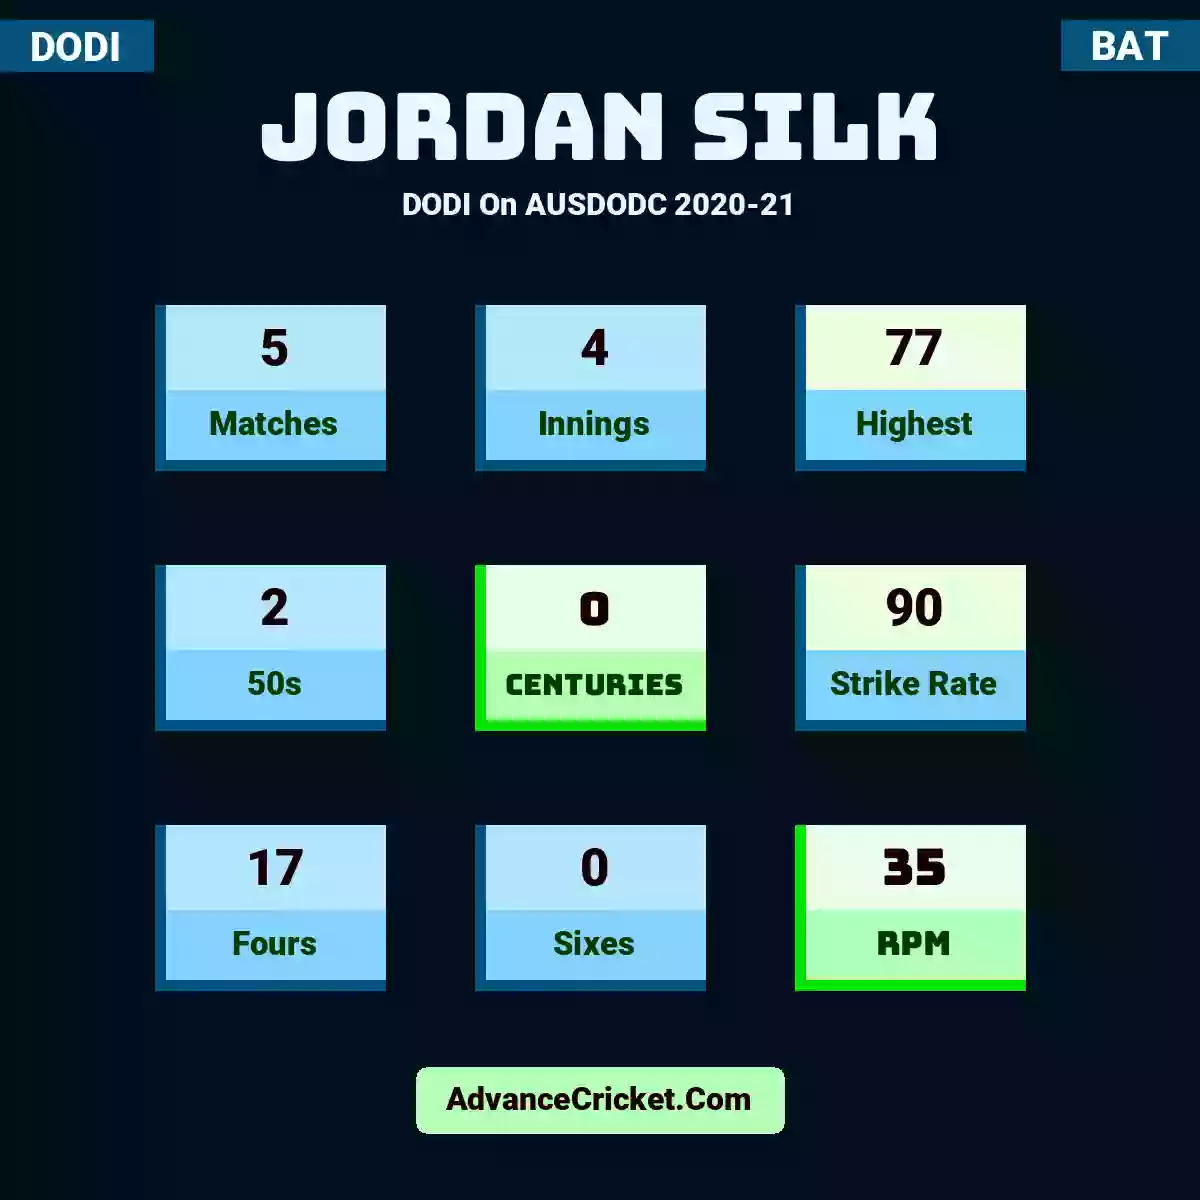 Jordan Silk DODI  On AUSDODC 2020-21, Jordan Silk played 5 matches, scored 77 runs as highest, 2 half-centuries, and 0 centuries, with a strike rate of 90. J.Silk hit 17 fours and 0 sixes, with an RPM of 35.